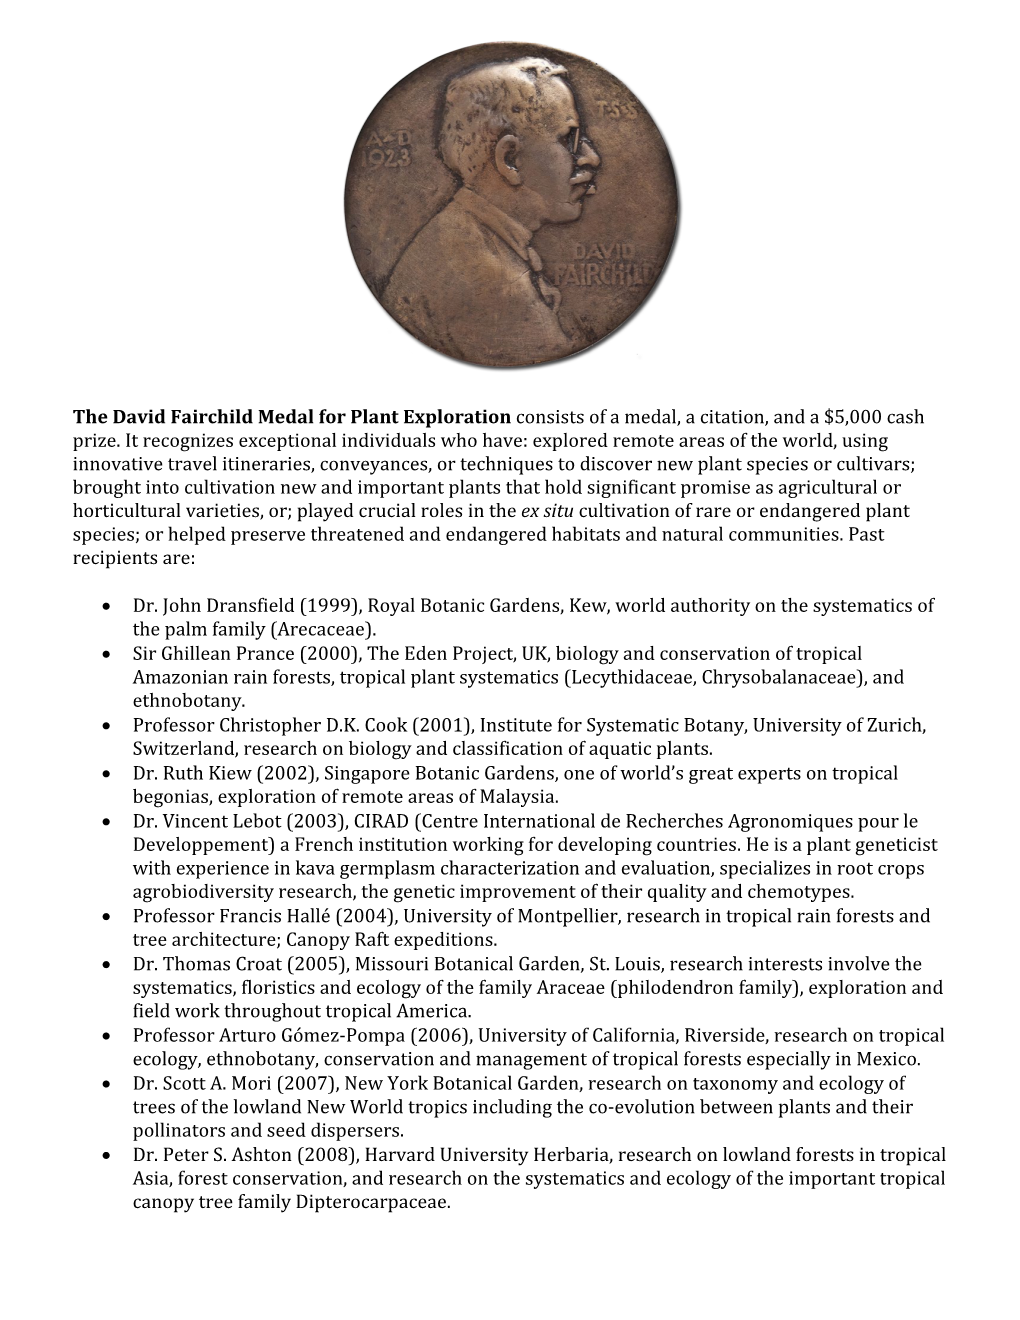 The David Fairchild Medal for Plant Exploration Consists of a Medal, a Citation, and a $5,000 Cash Prize